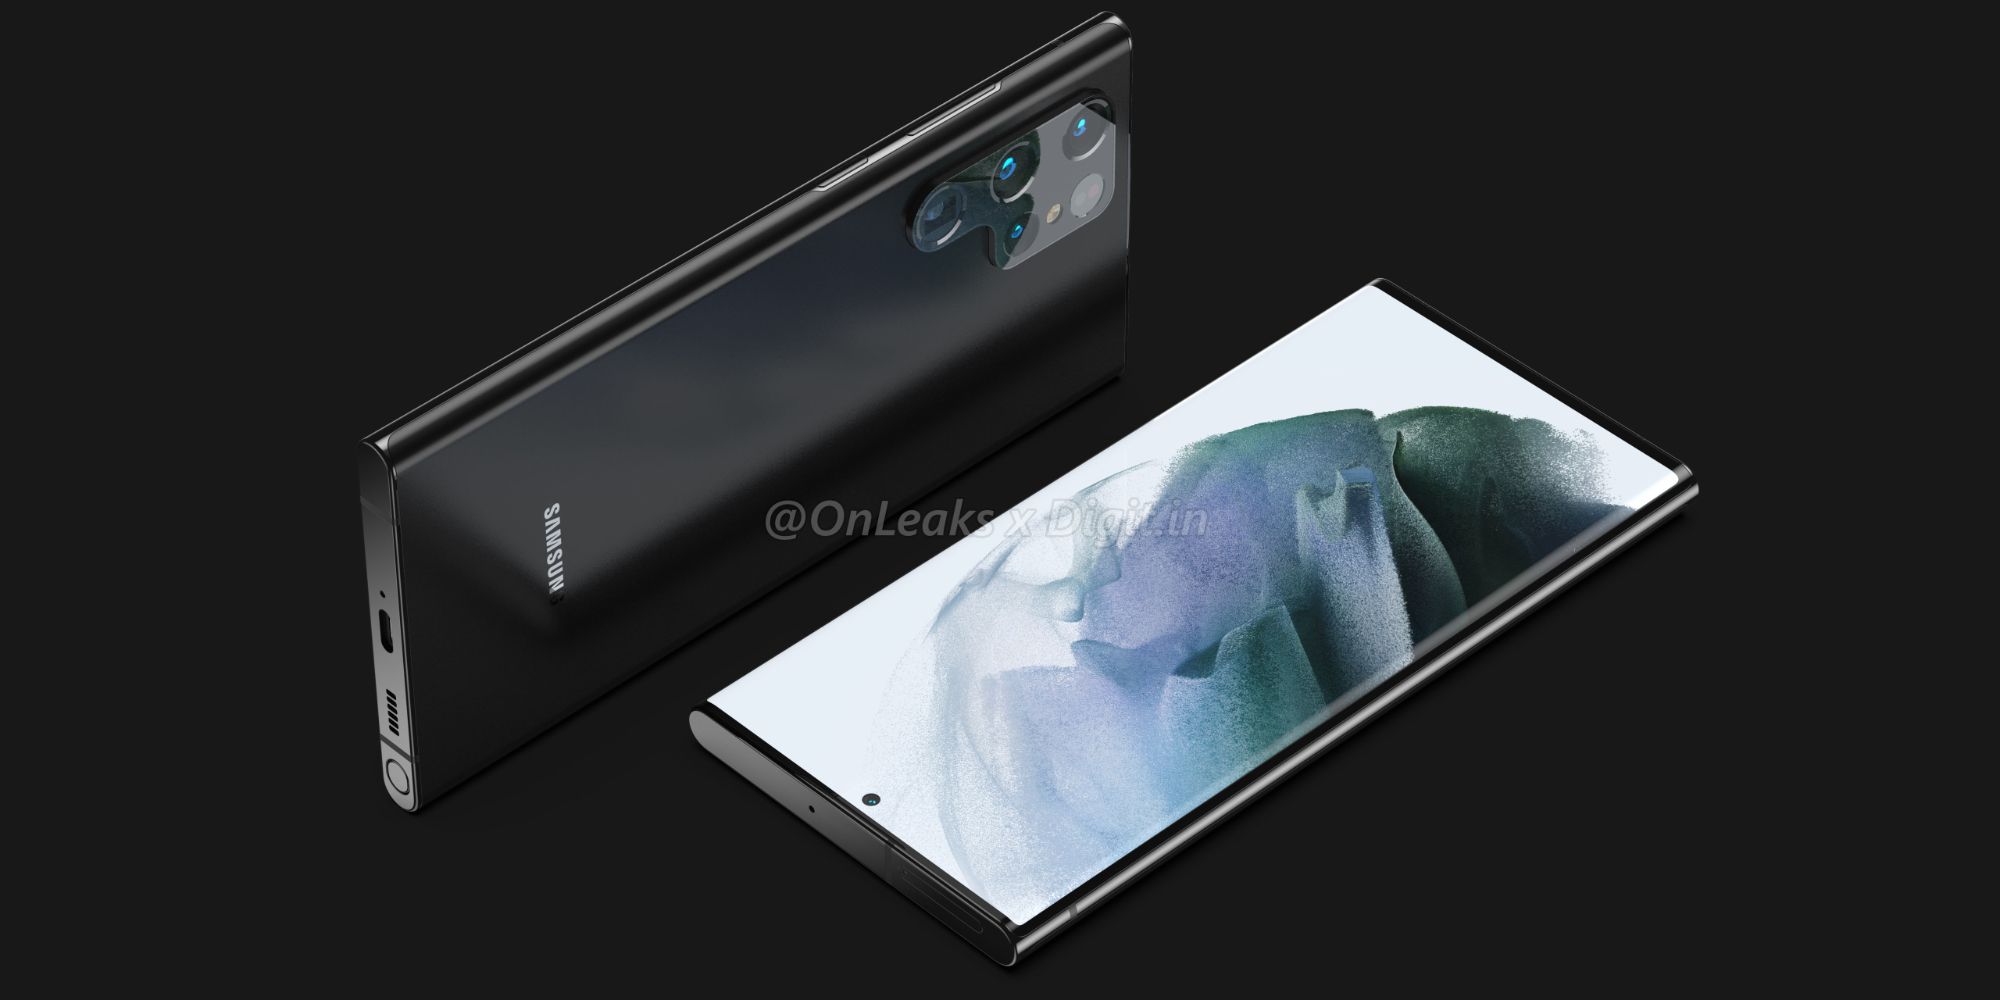 Early render of the Galaxy S22 Ultra